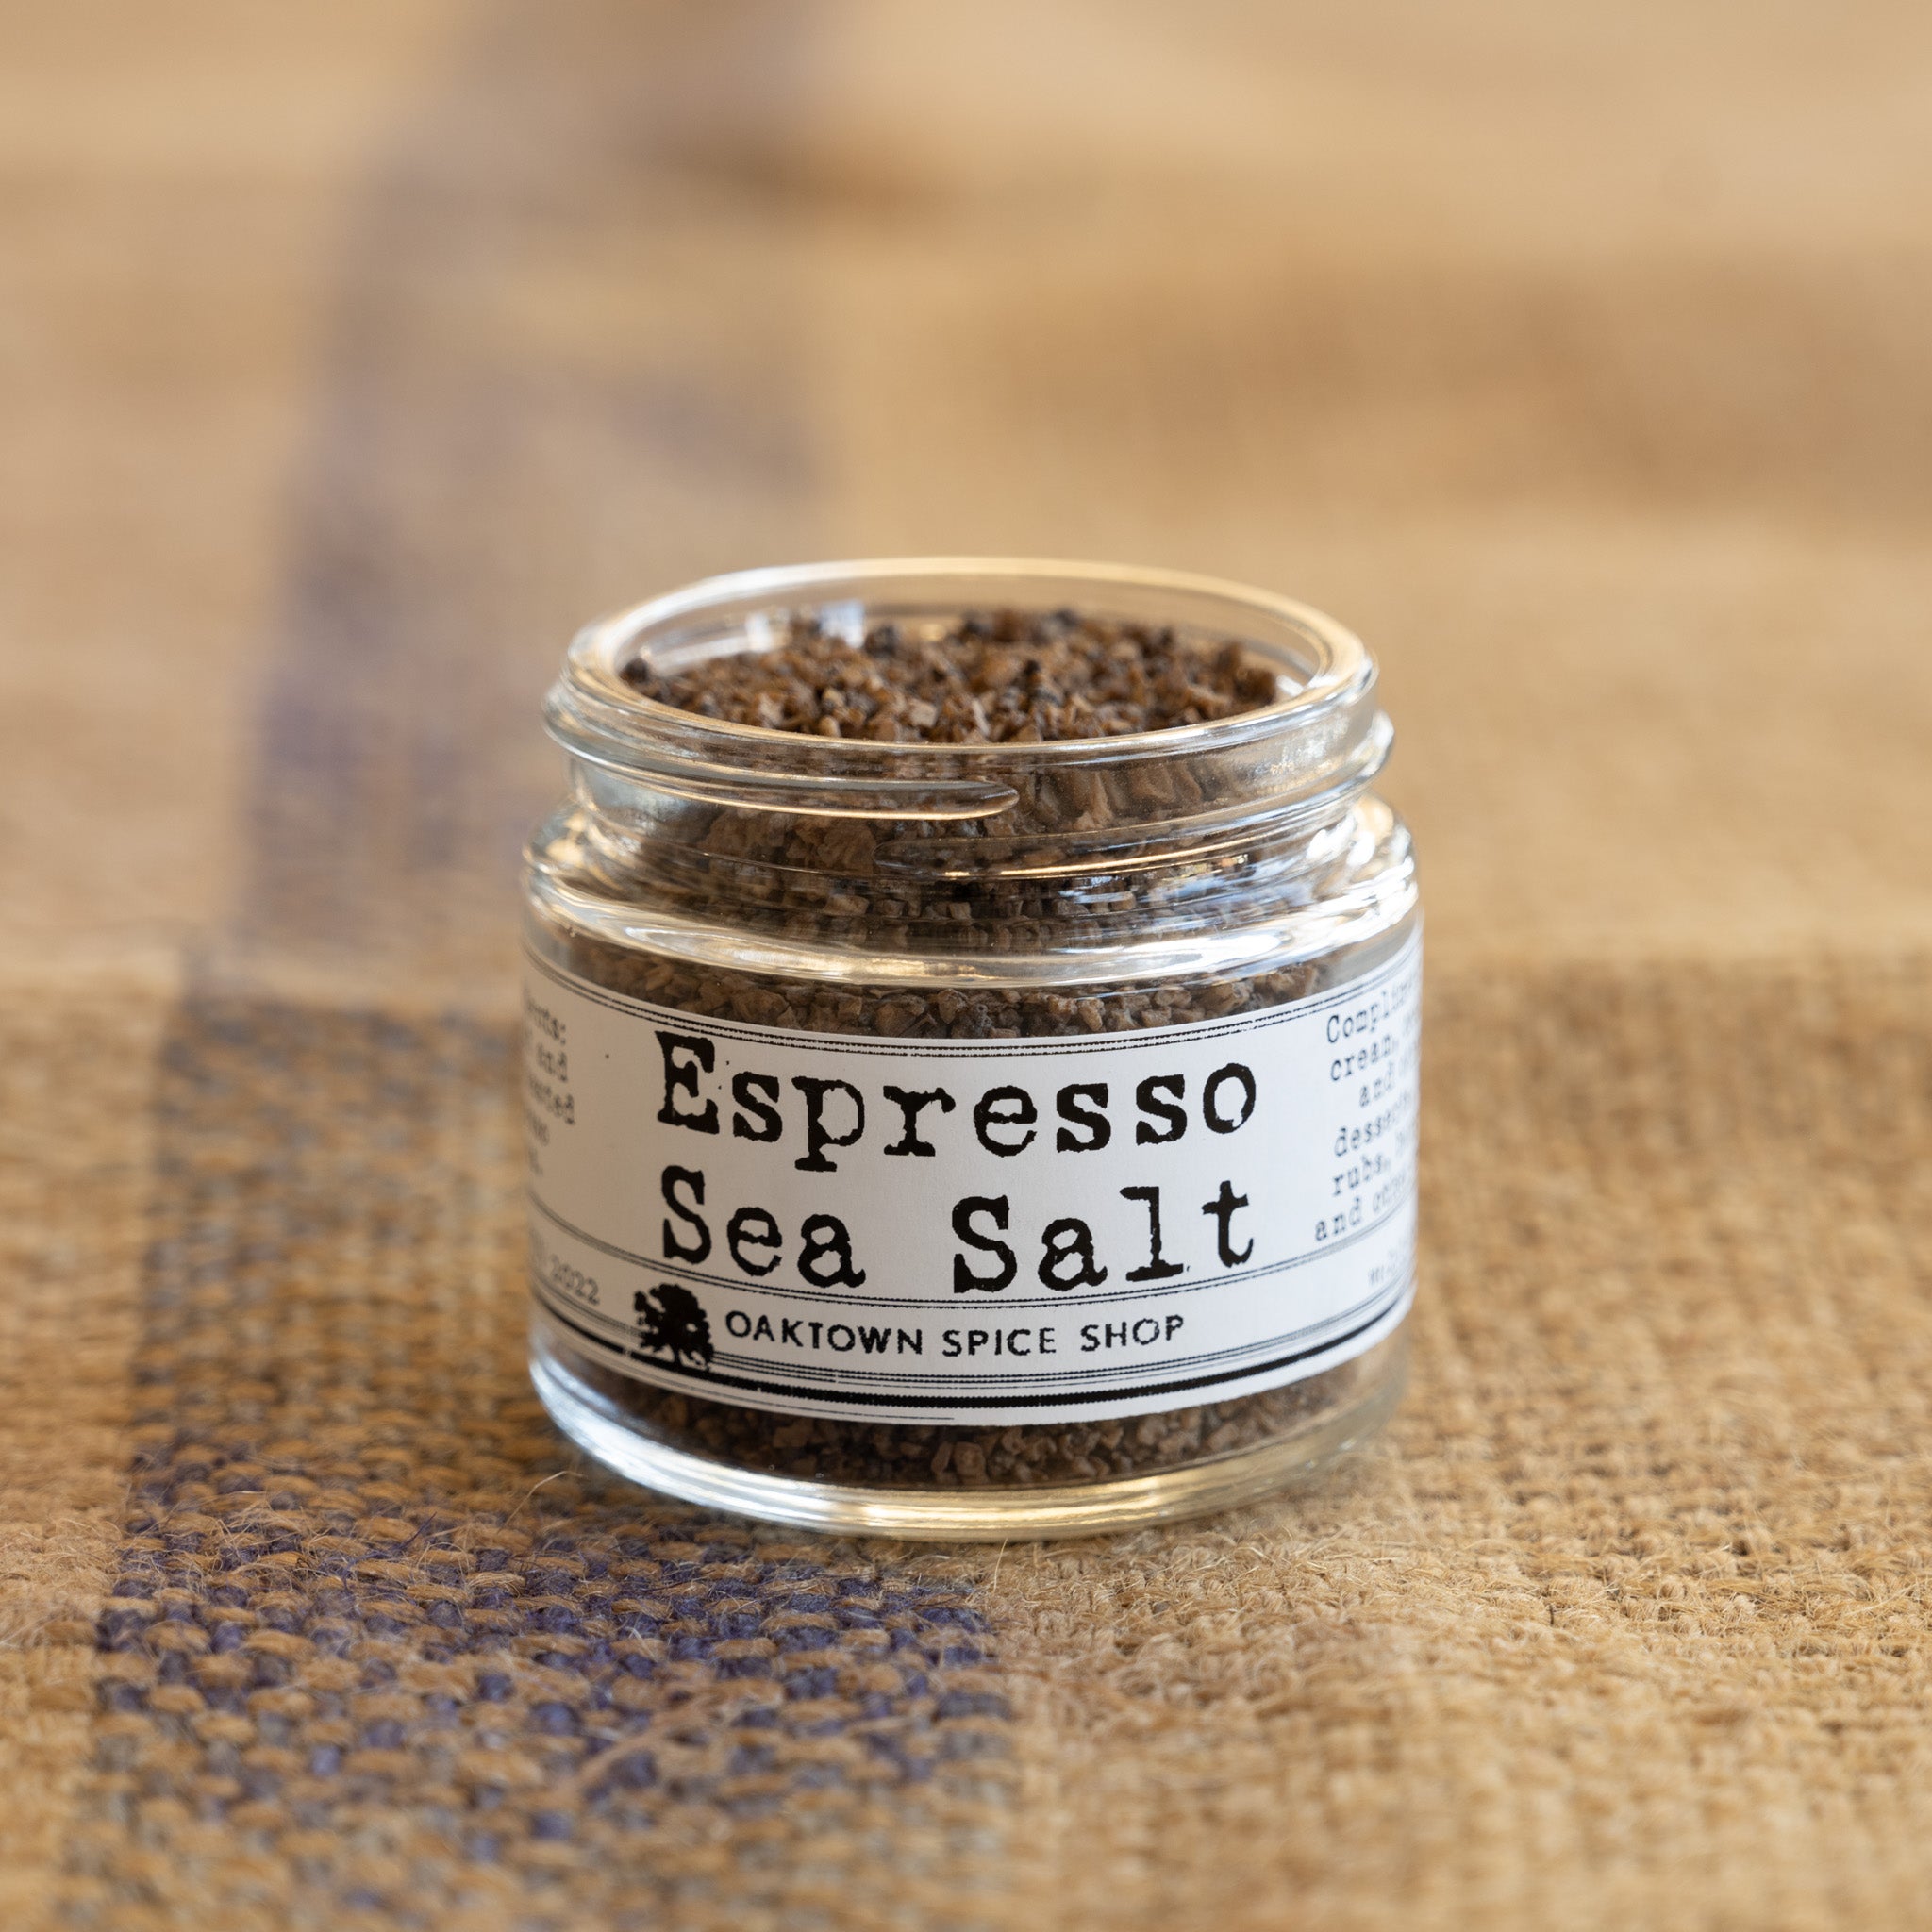 Espresso Sea Salt by Oaktown Spice Shop with Sea Salt and Roasted Espresso Beans adds richness to ice cream, cookies and other desserts as well as BBQ rubs, burgers and other meats